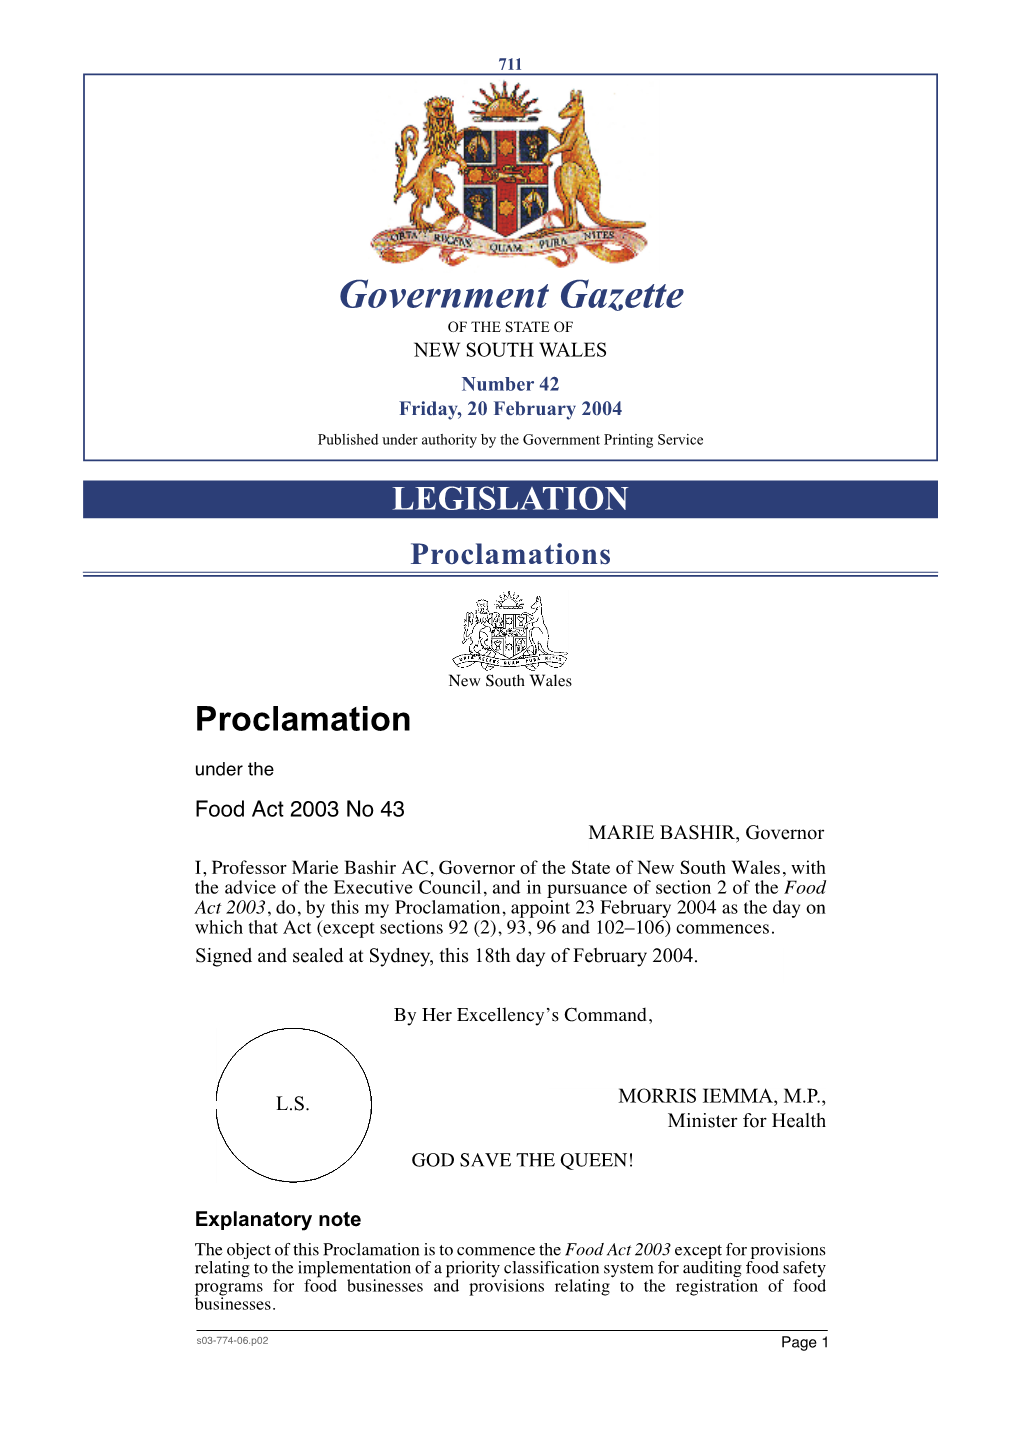 Government Gazette of the STATE of NEW SOUTH WALES Number 42 New South Wales Friday, 20 February 2004 Published Under Authority by the Government Printing Service